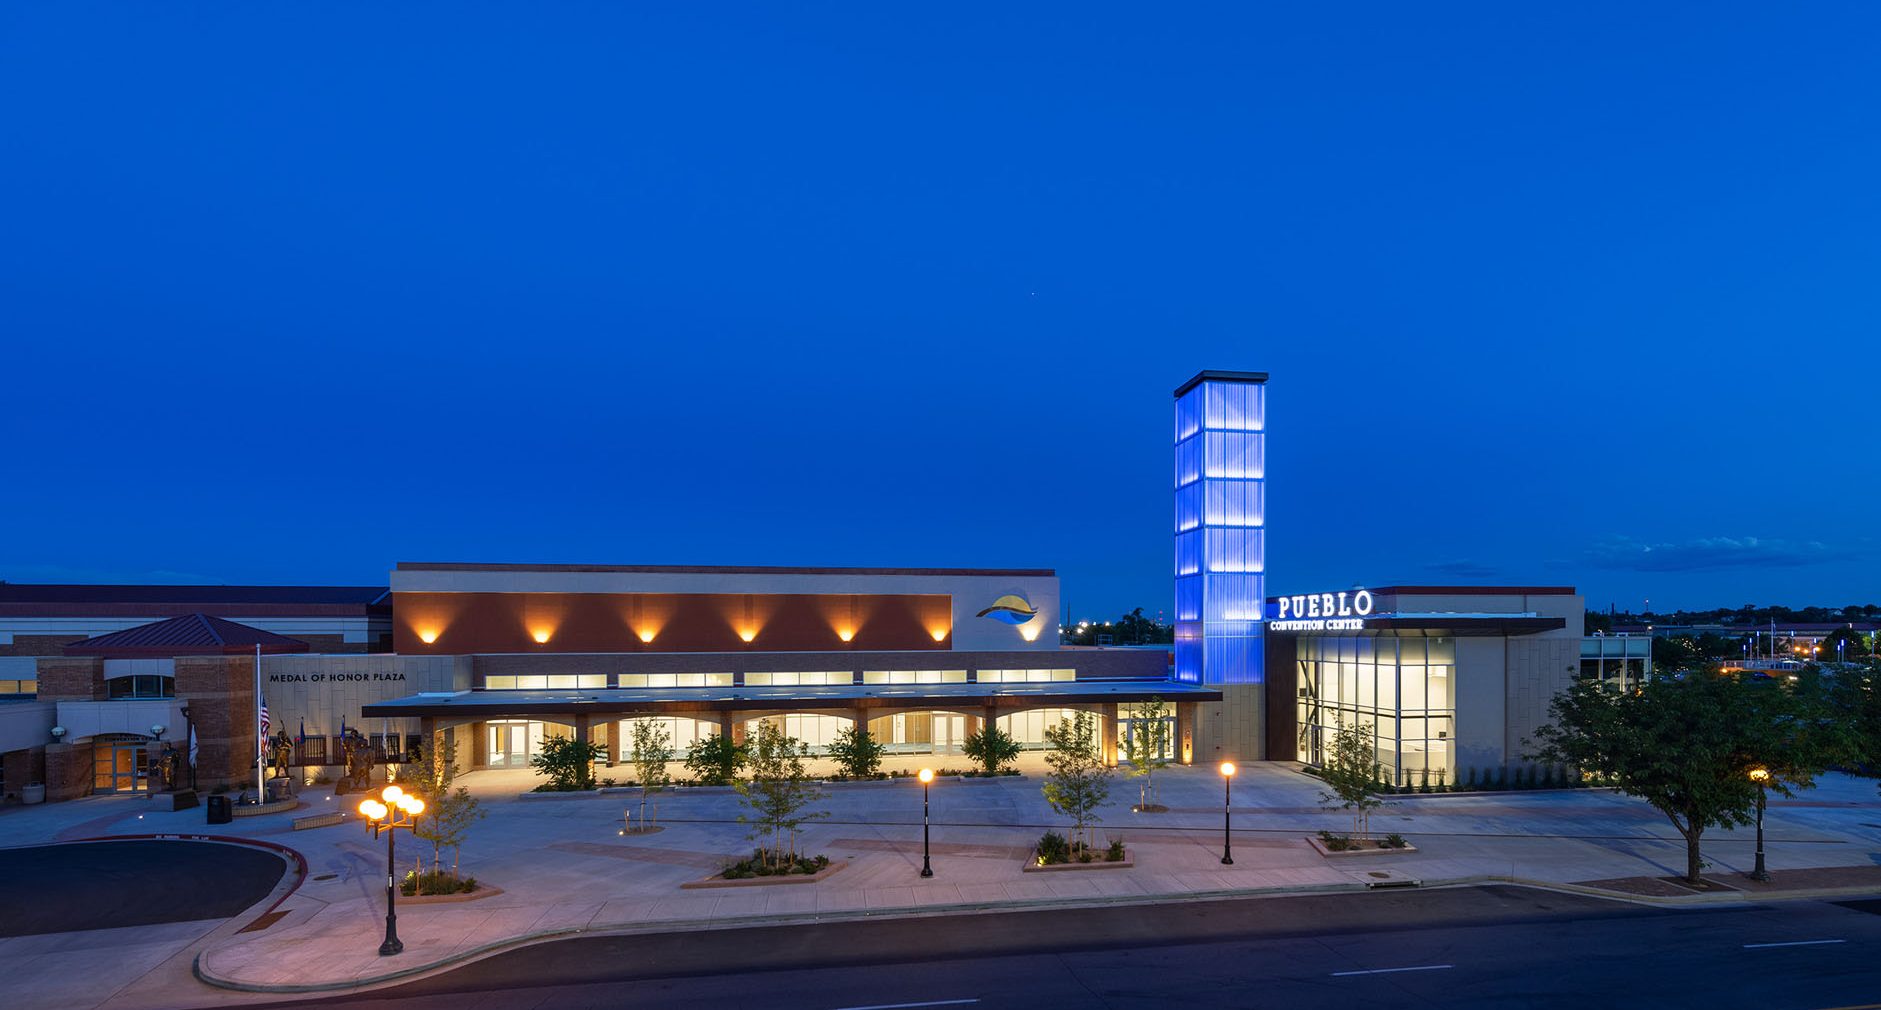 Pueblo Convention Center exterior at nighttime featuring blue backlighting on building tower with Kalwall facade.